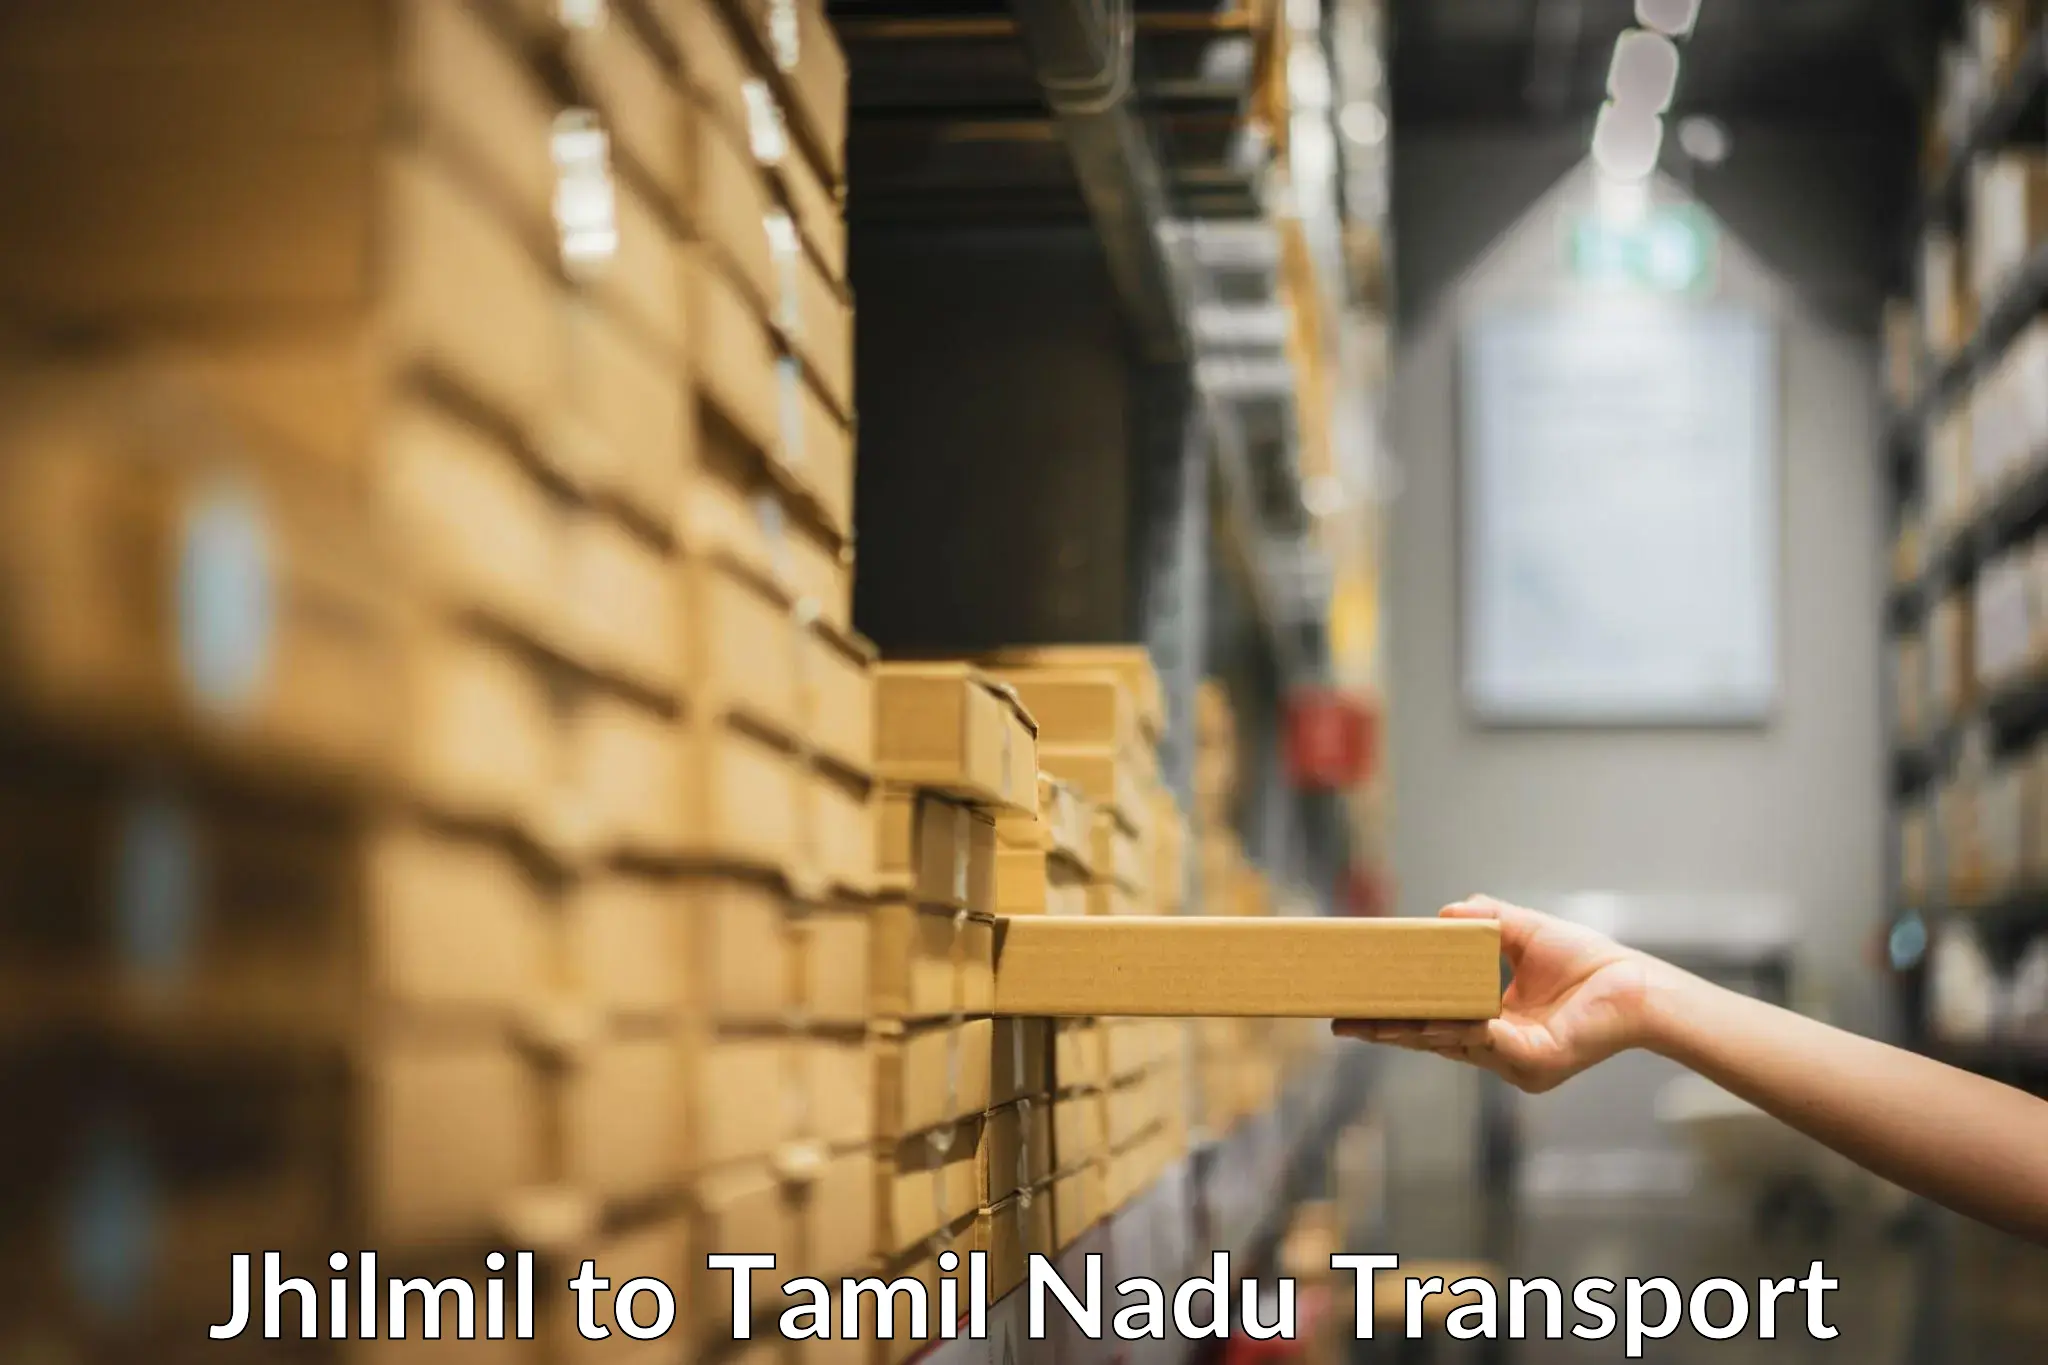 Truck transport companies in India Jhilmil to Anthiyur